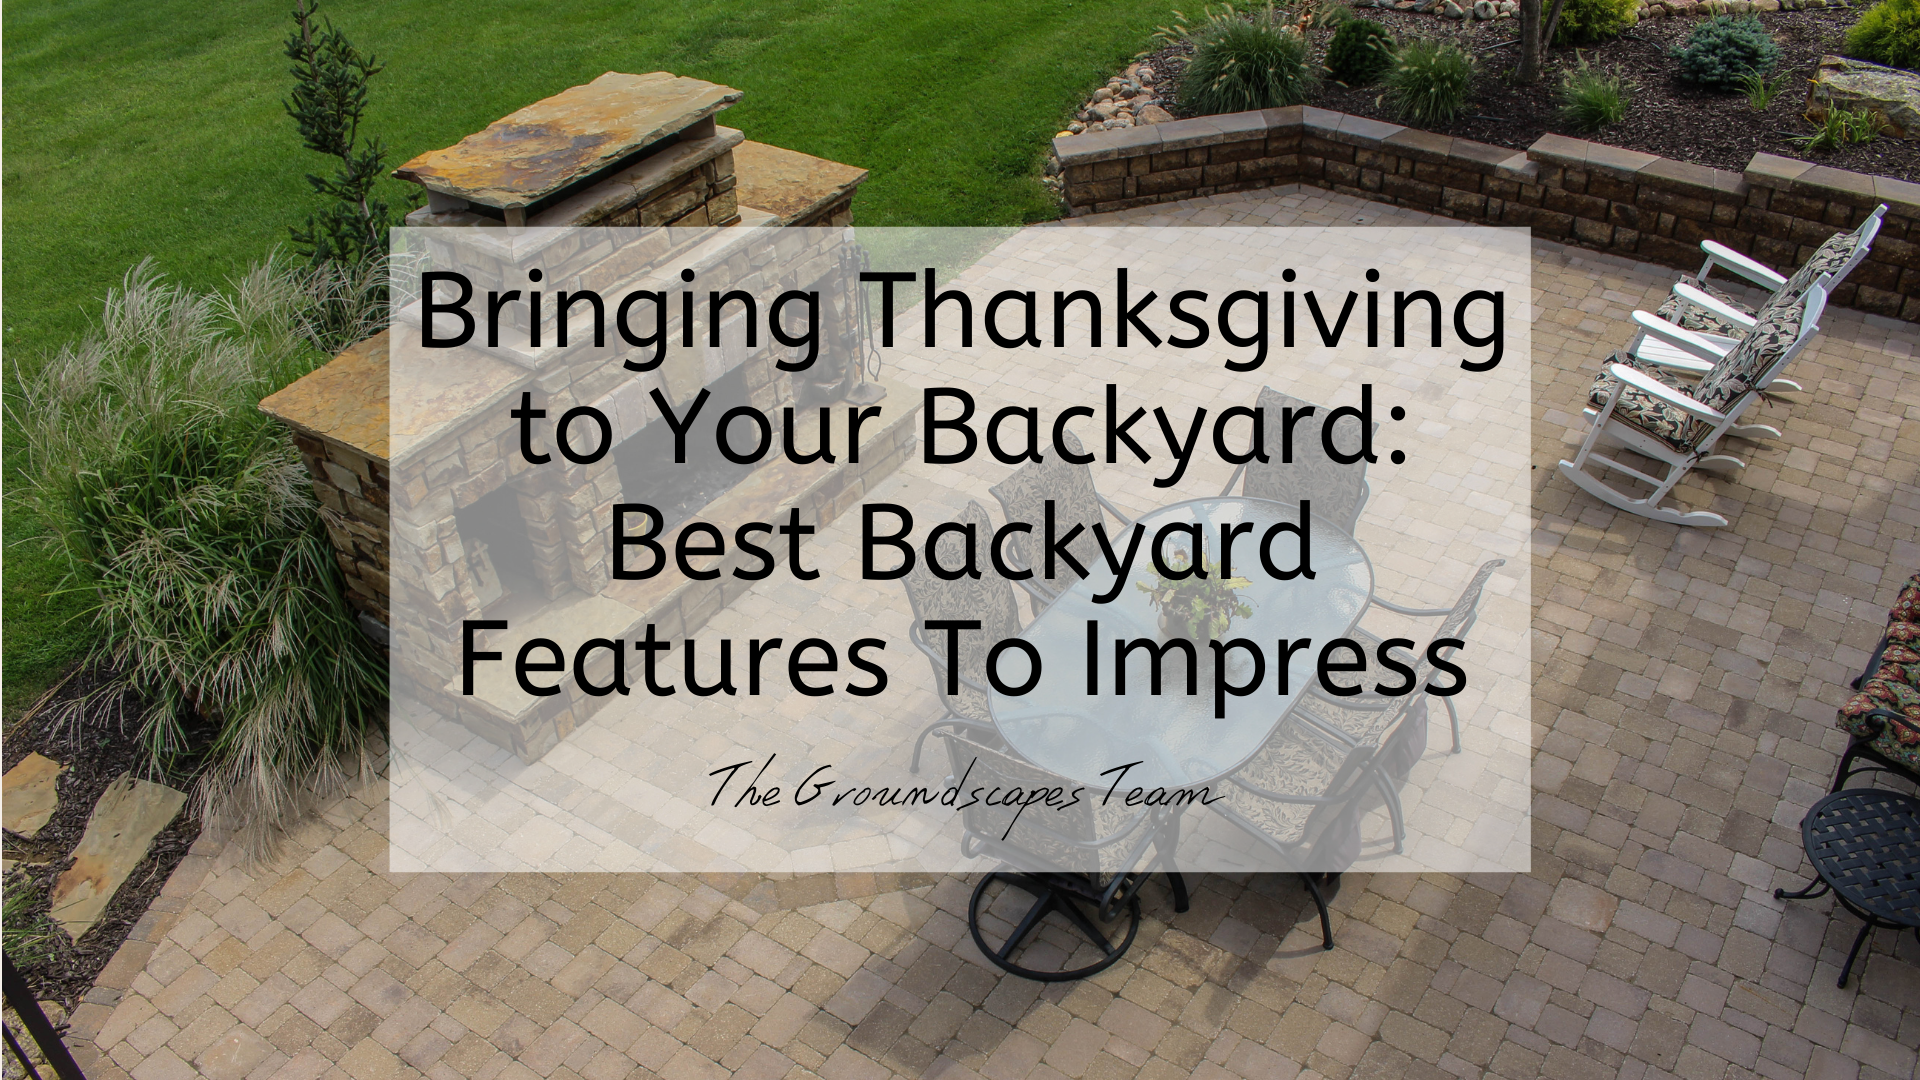 Bringing Thanksgiving to Your Backyard: Best Backyard Features To Impress